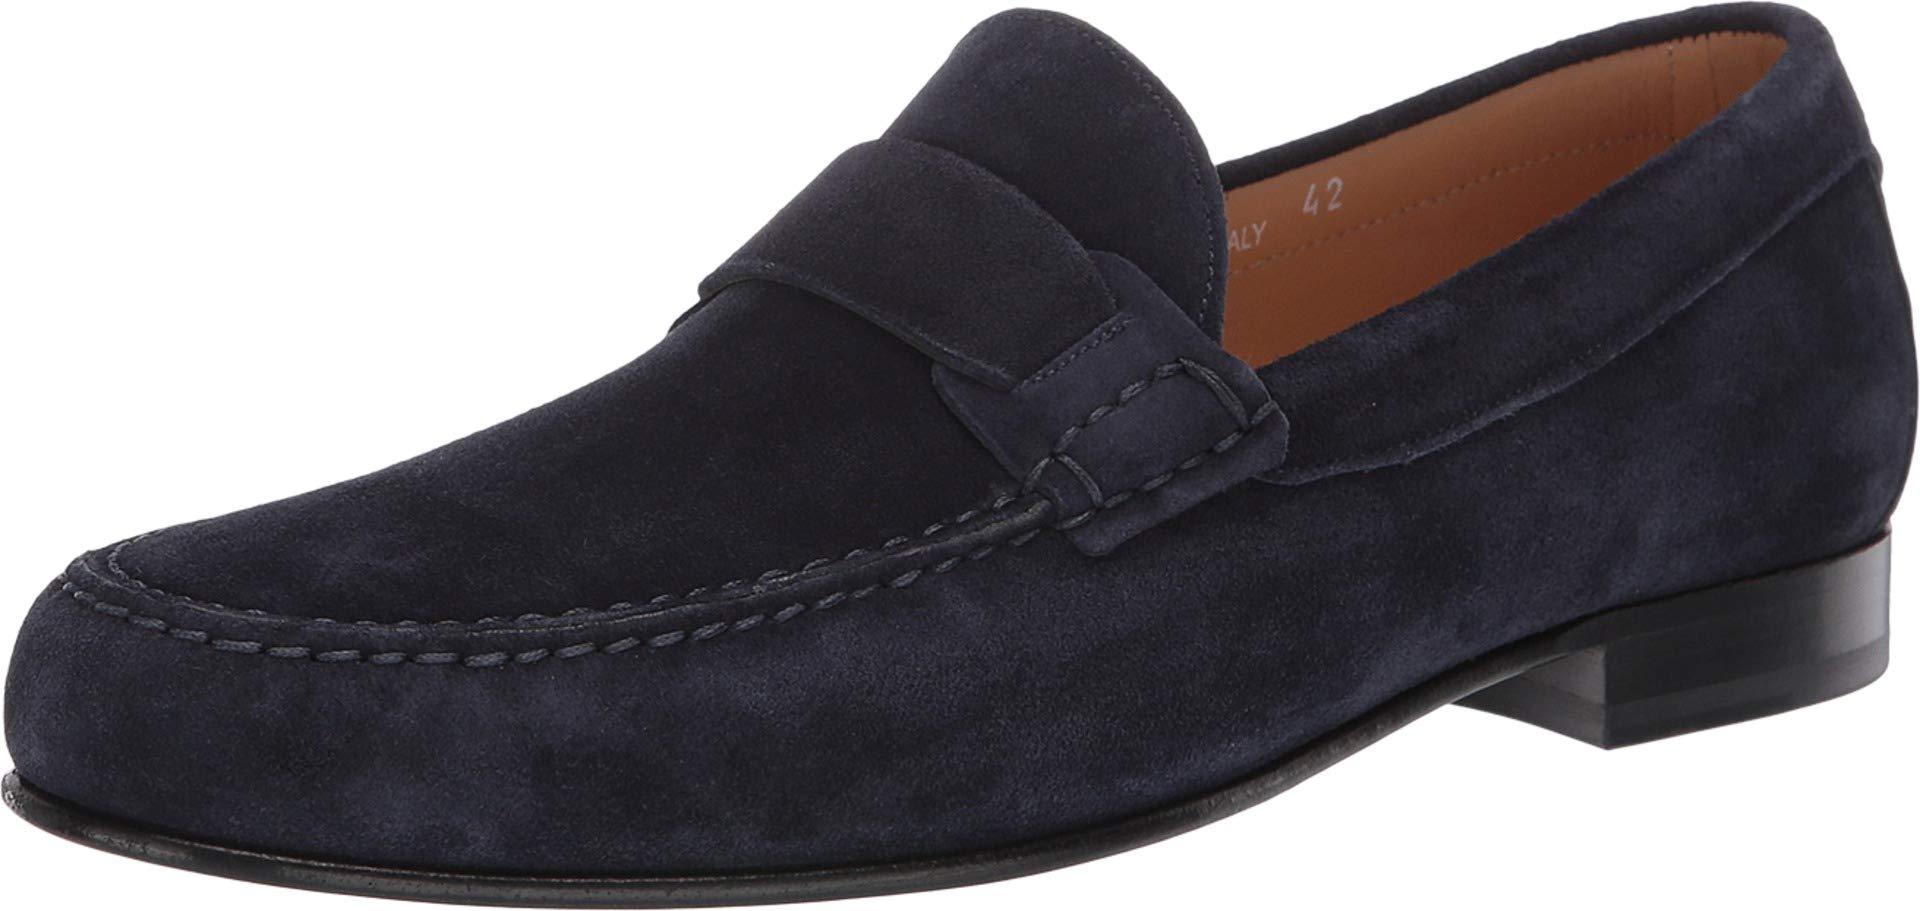 Canali Suede Moccasin Toe Loafer in Navy Suede (Blue) for Men - Lyst